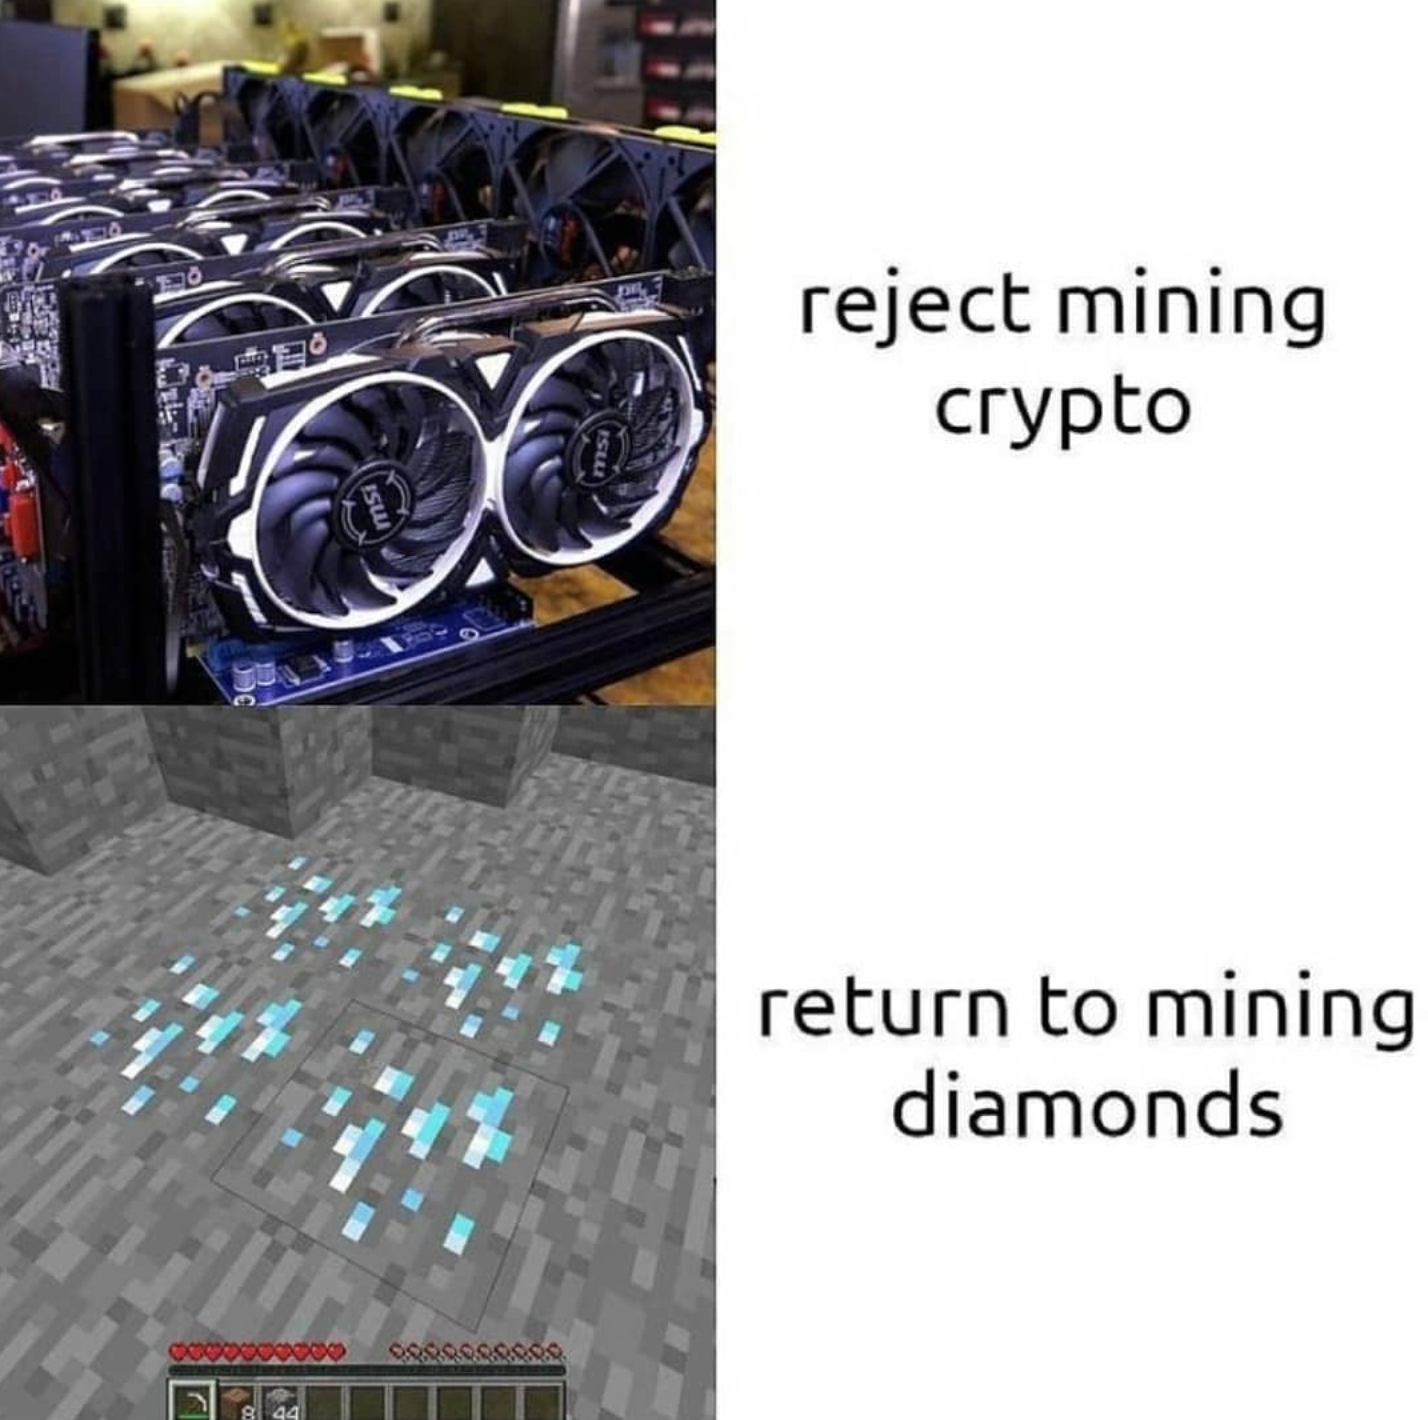 funny gaming memes - reject mining crypto return to mining diamonds